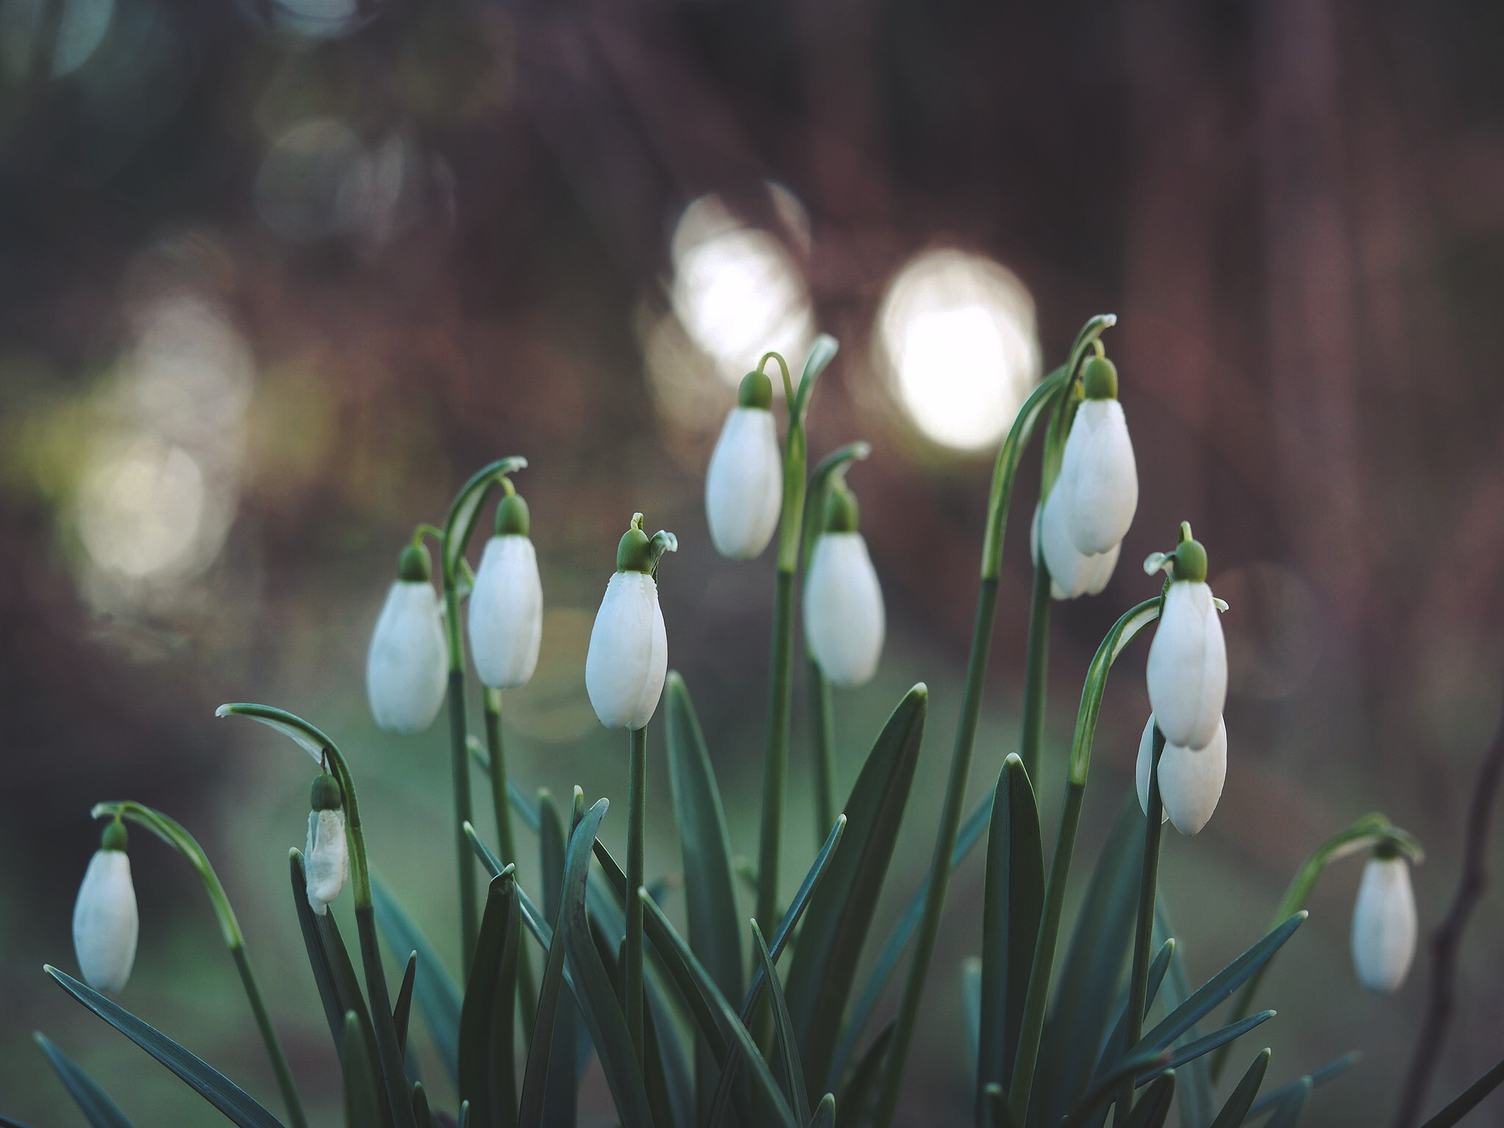 Buds of Beautiful Snowdrop Flowers - Galanthus Nivalis at Spring